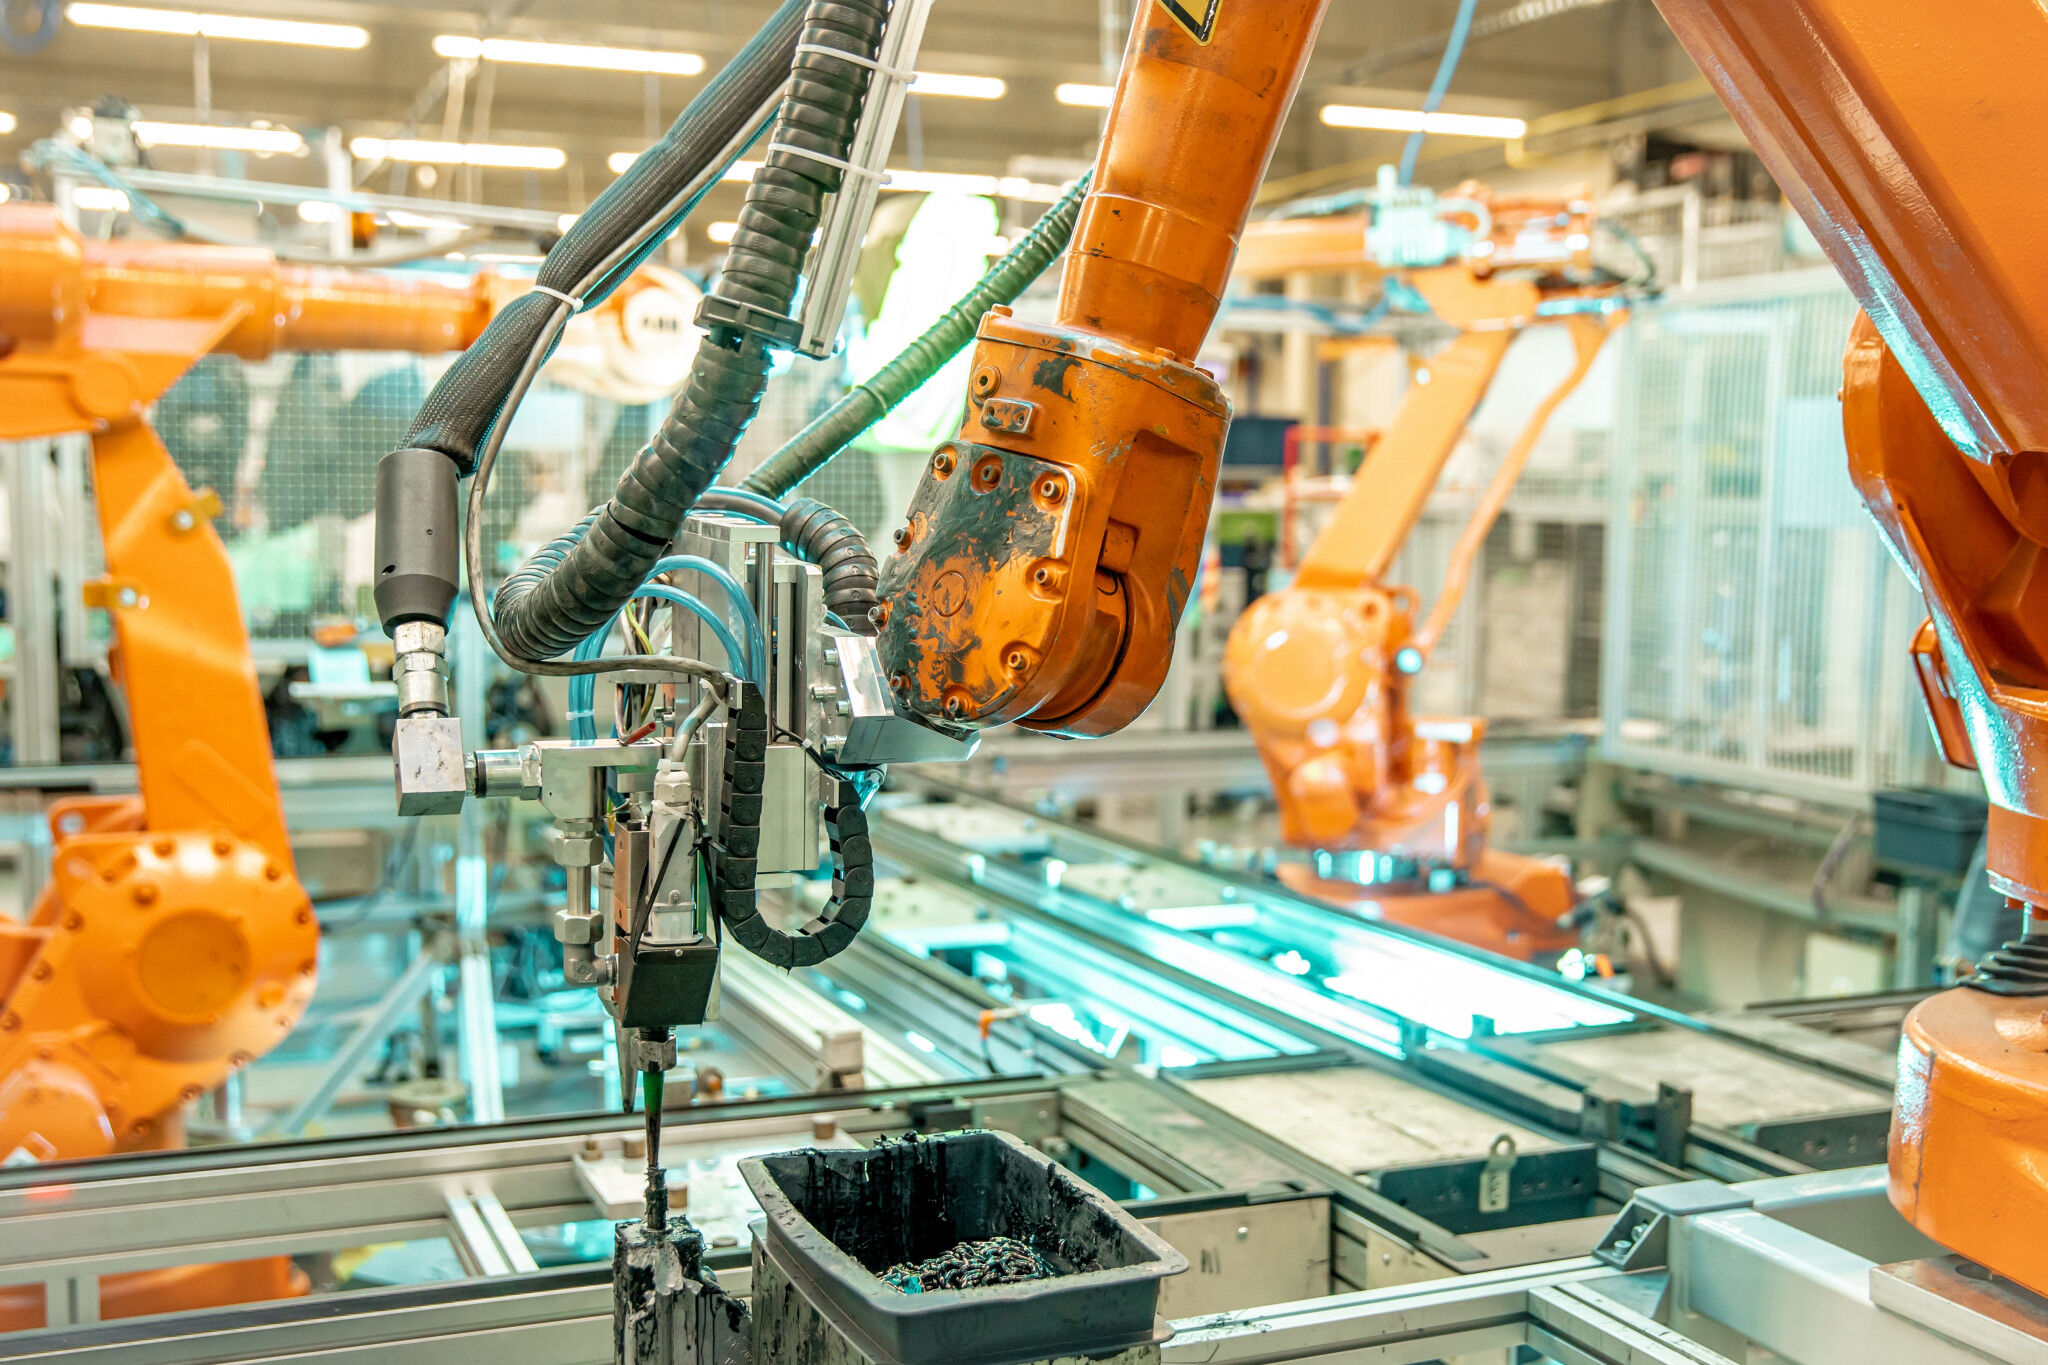 Key factors for a successful smart manufacturing journey